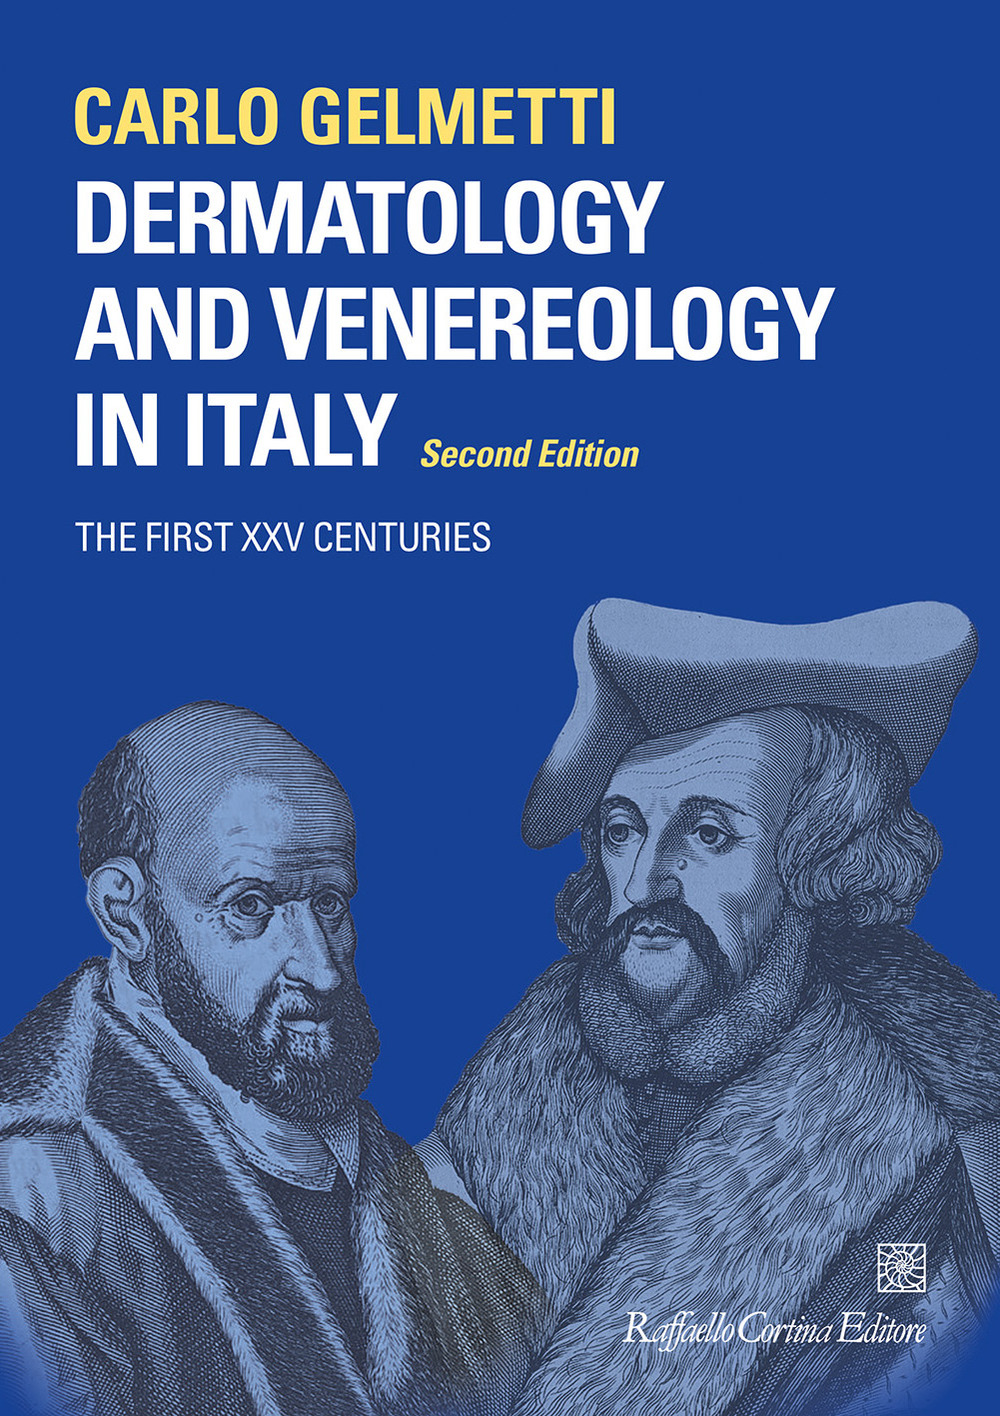 Dermatology and venereology in Italy. The first XXV centuries